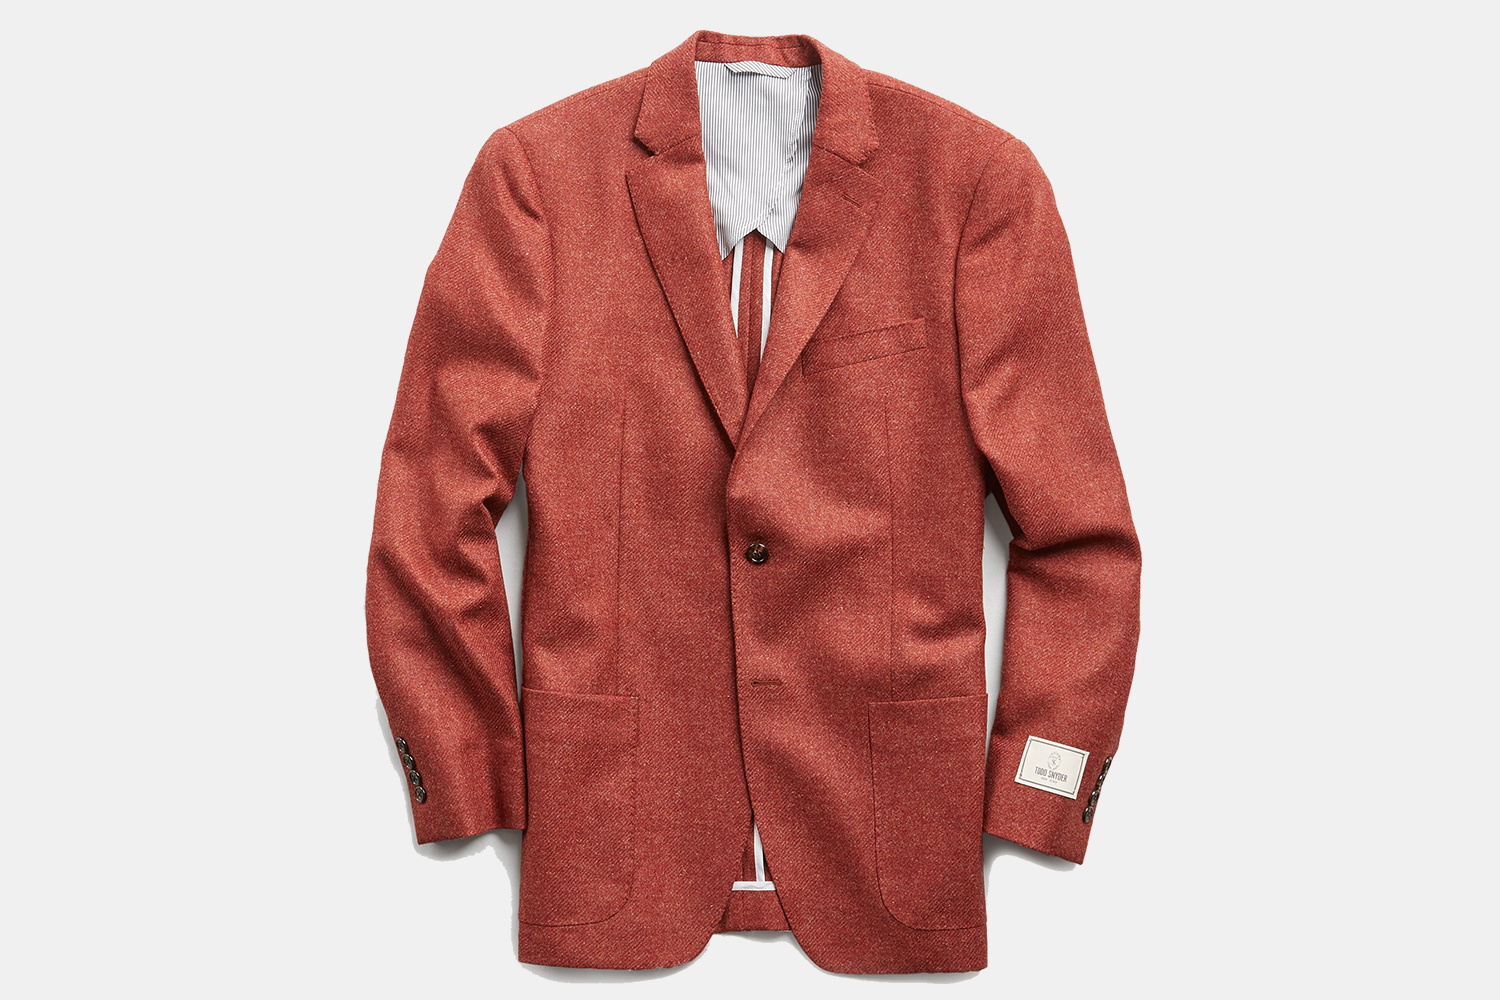 Todd Snyder Sutton Lambswool/Cashmere Sport Coat